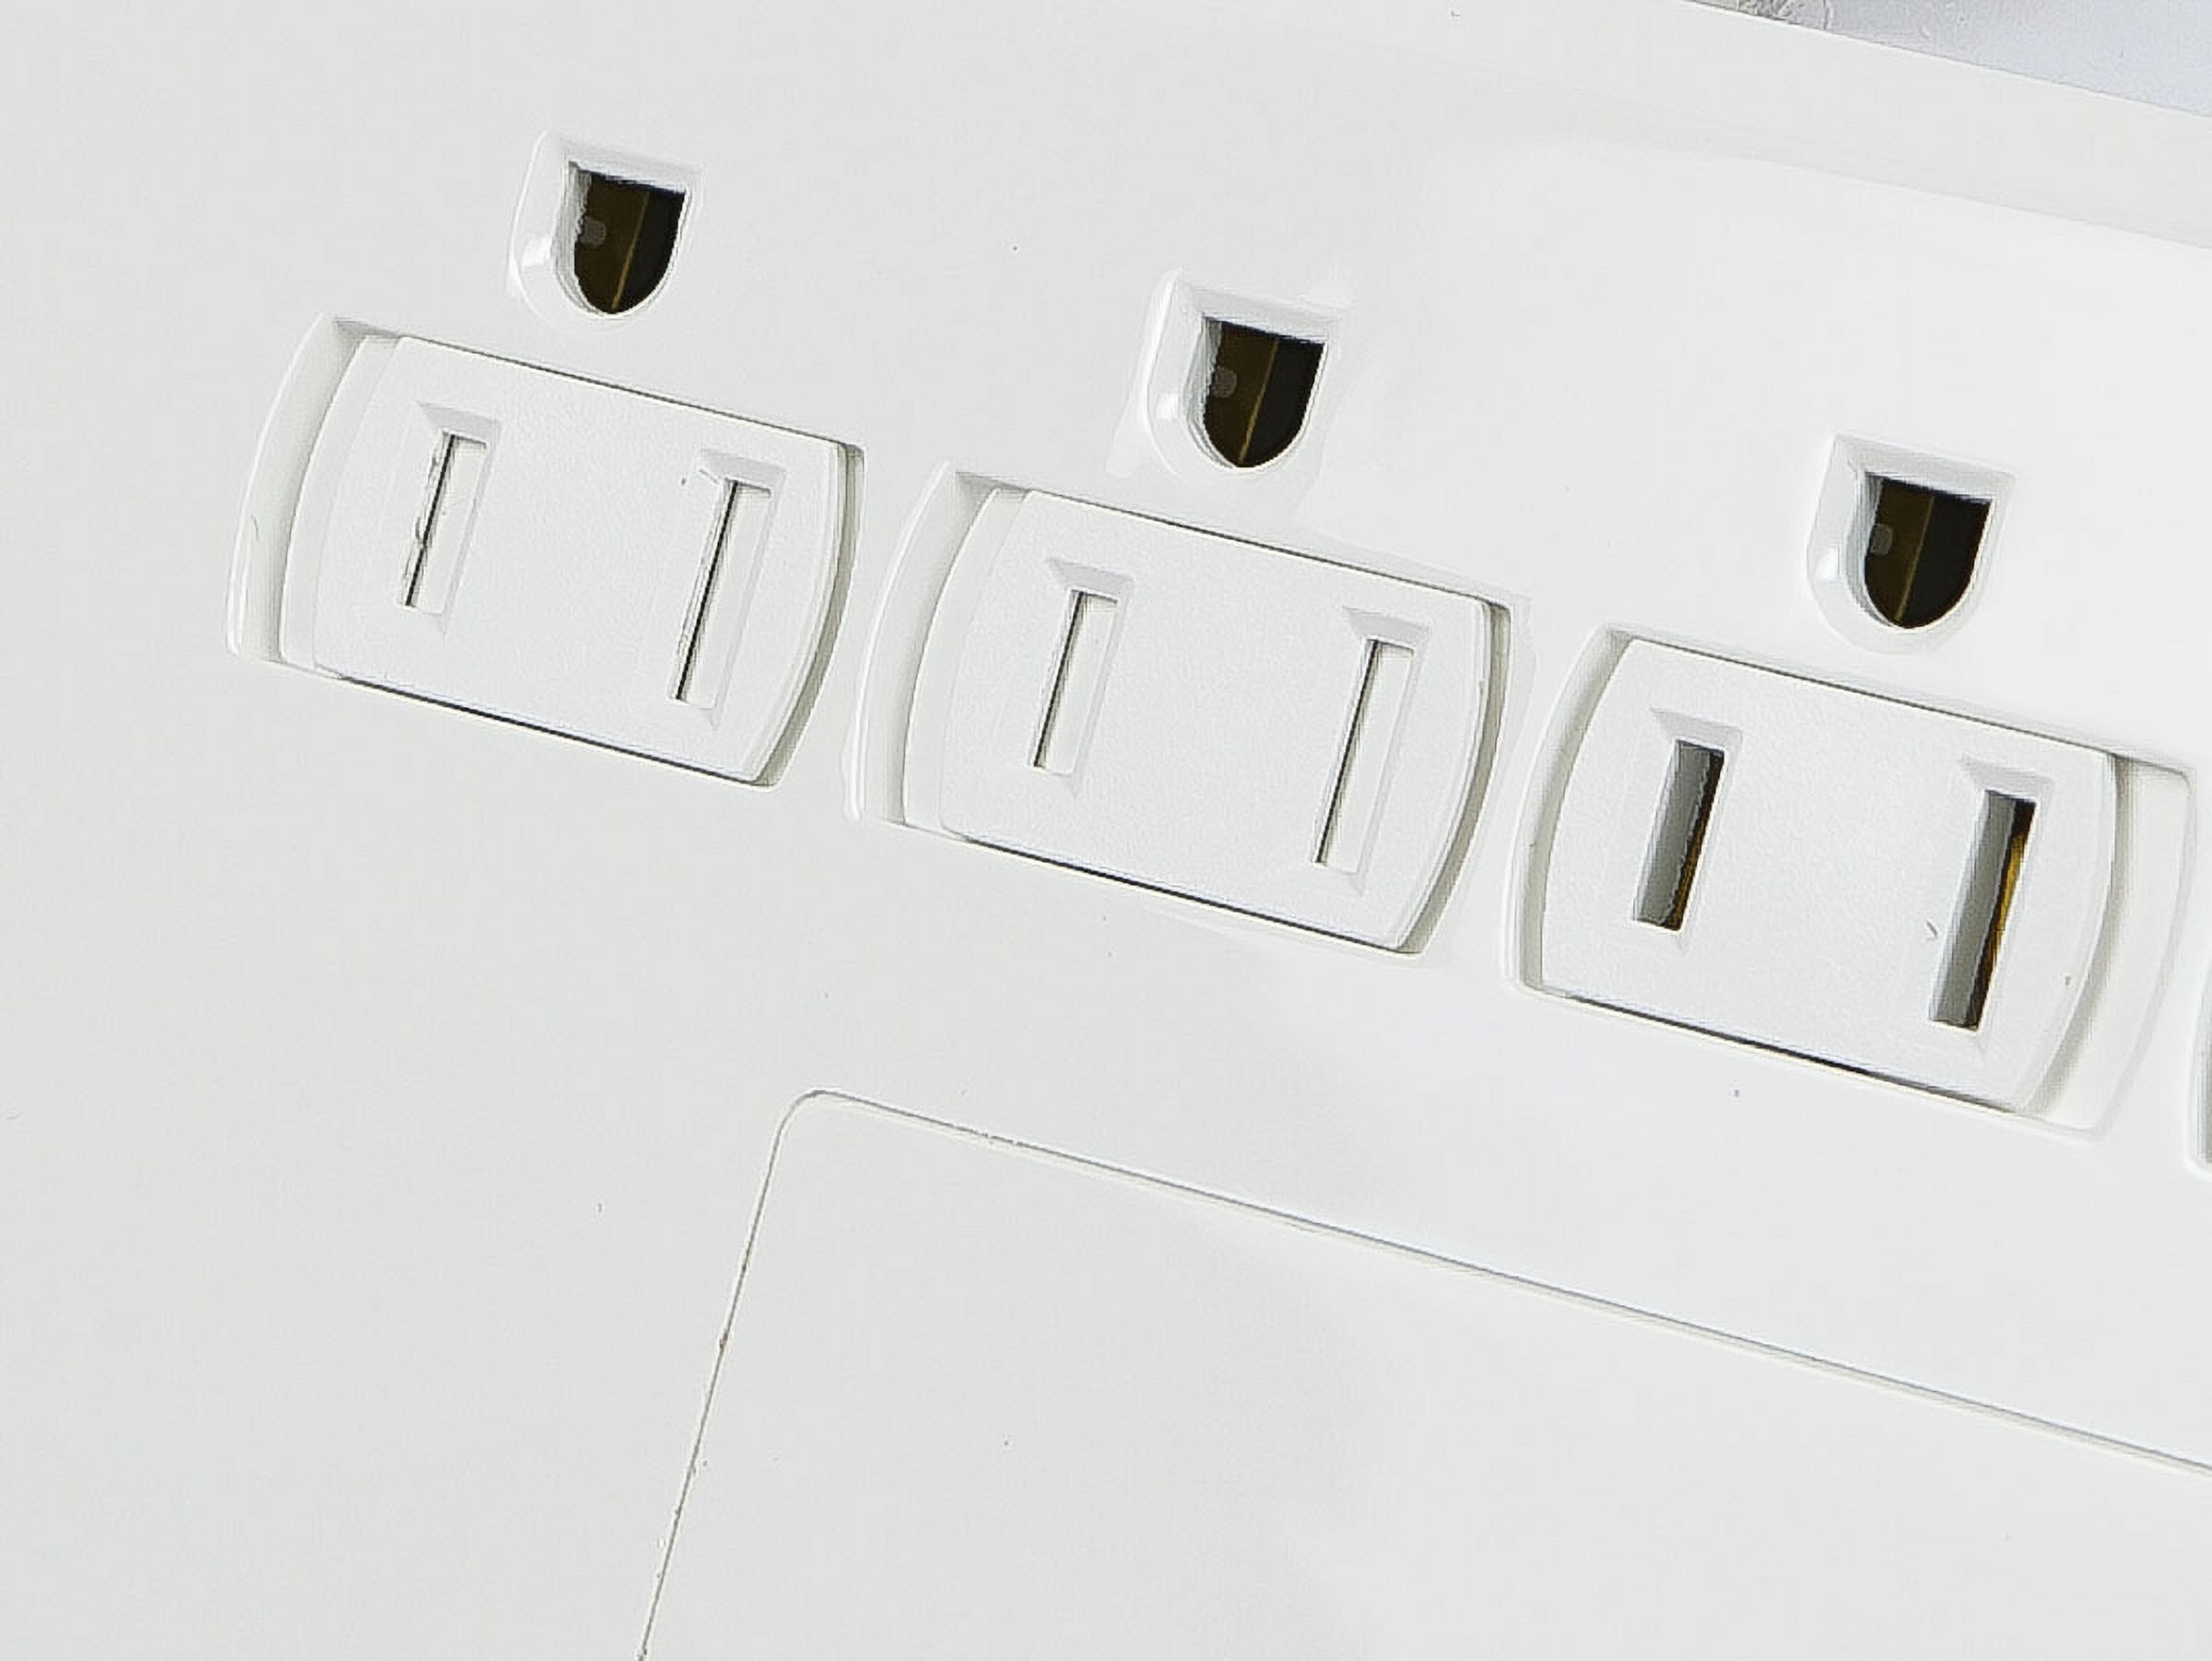 Monoprice 12 Outlet Power Surge Protector w/ 2 Built-In USB Charger Ports, 4230 Joules - image 4 of 6